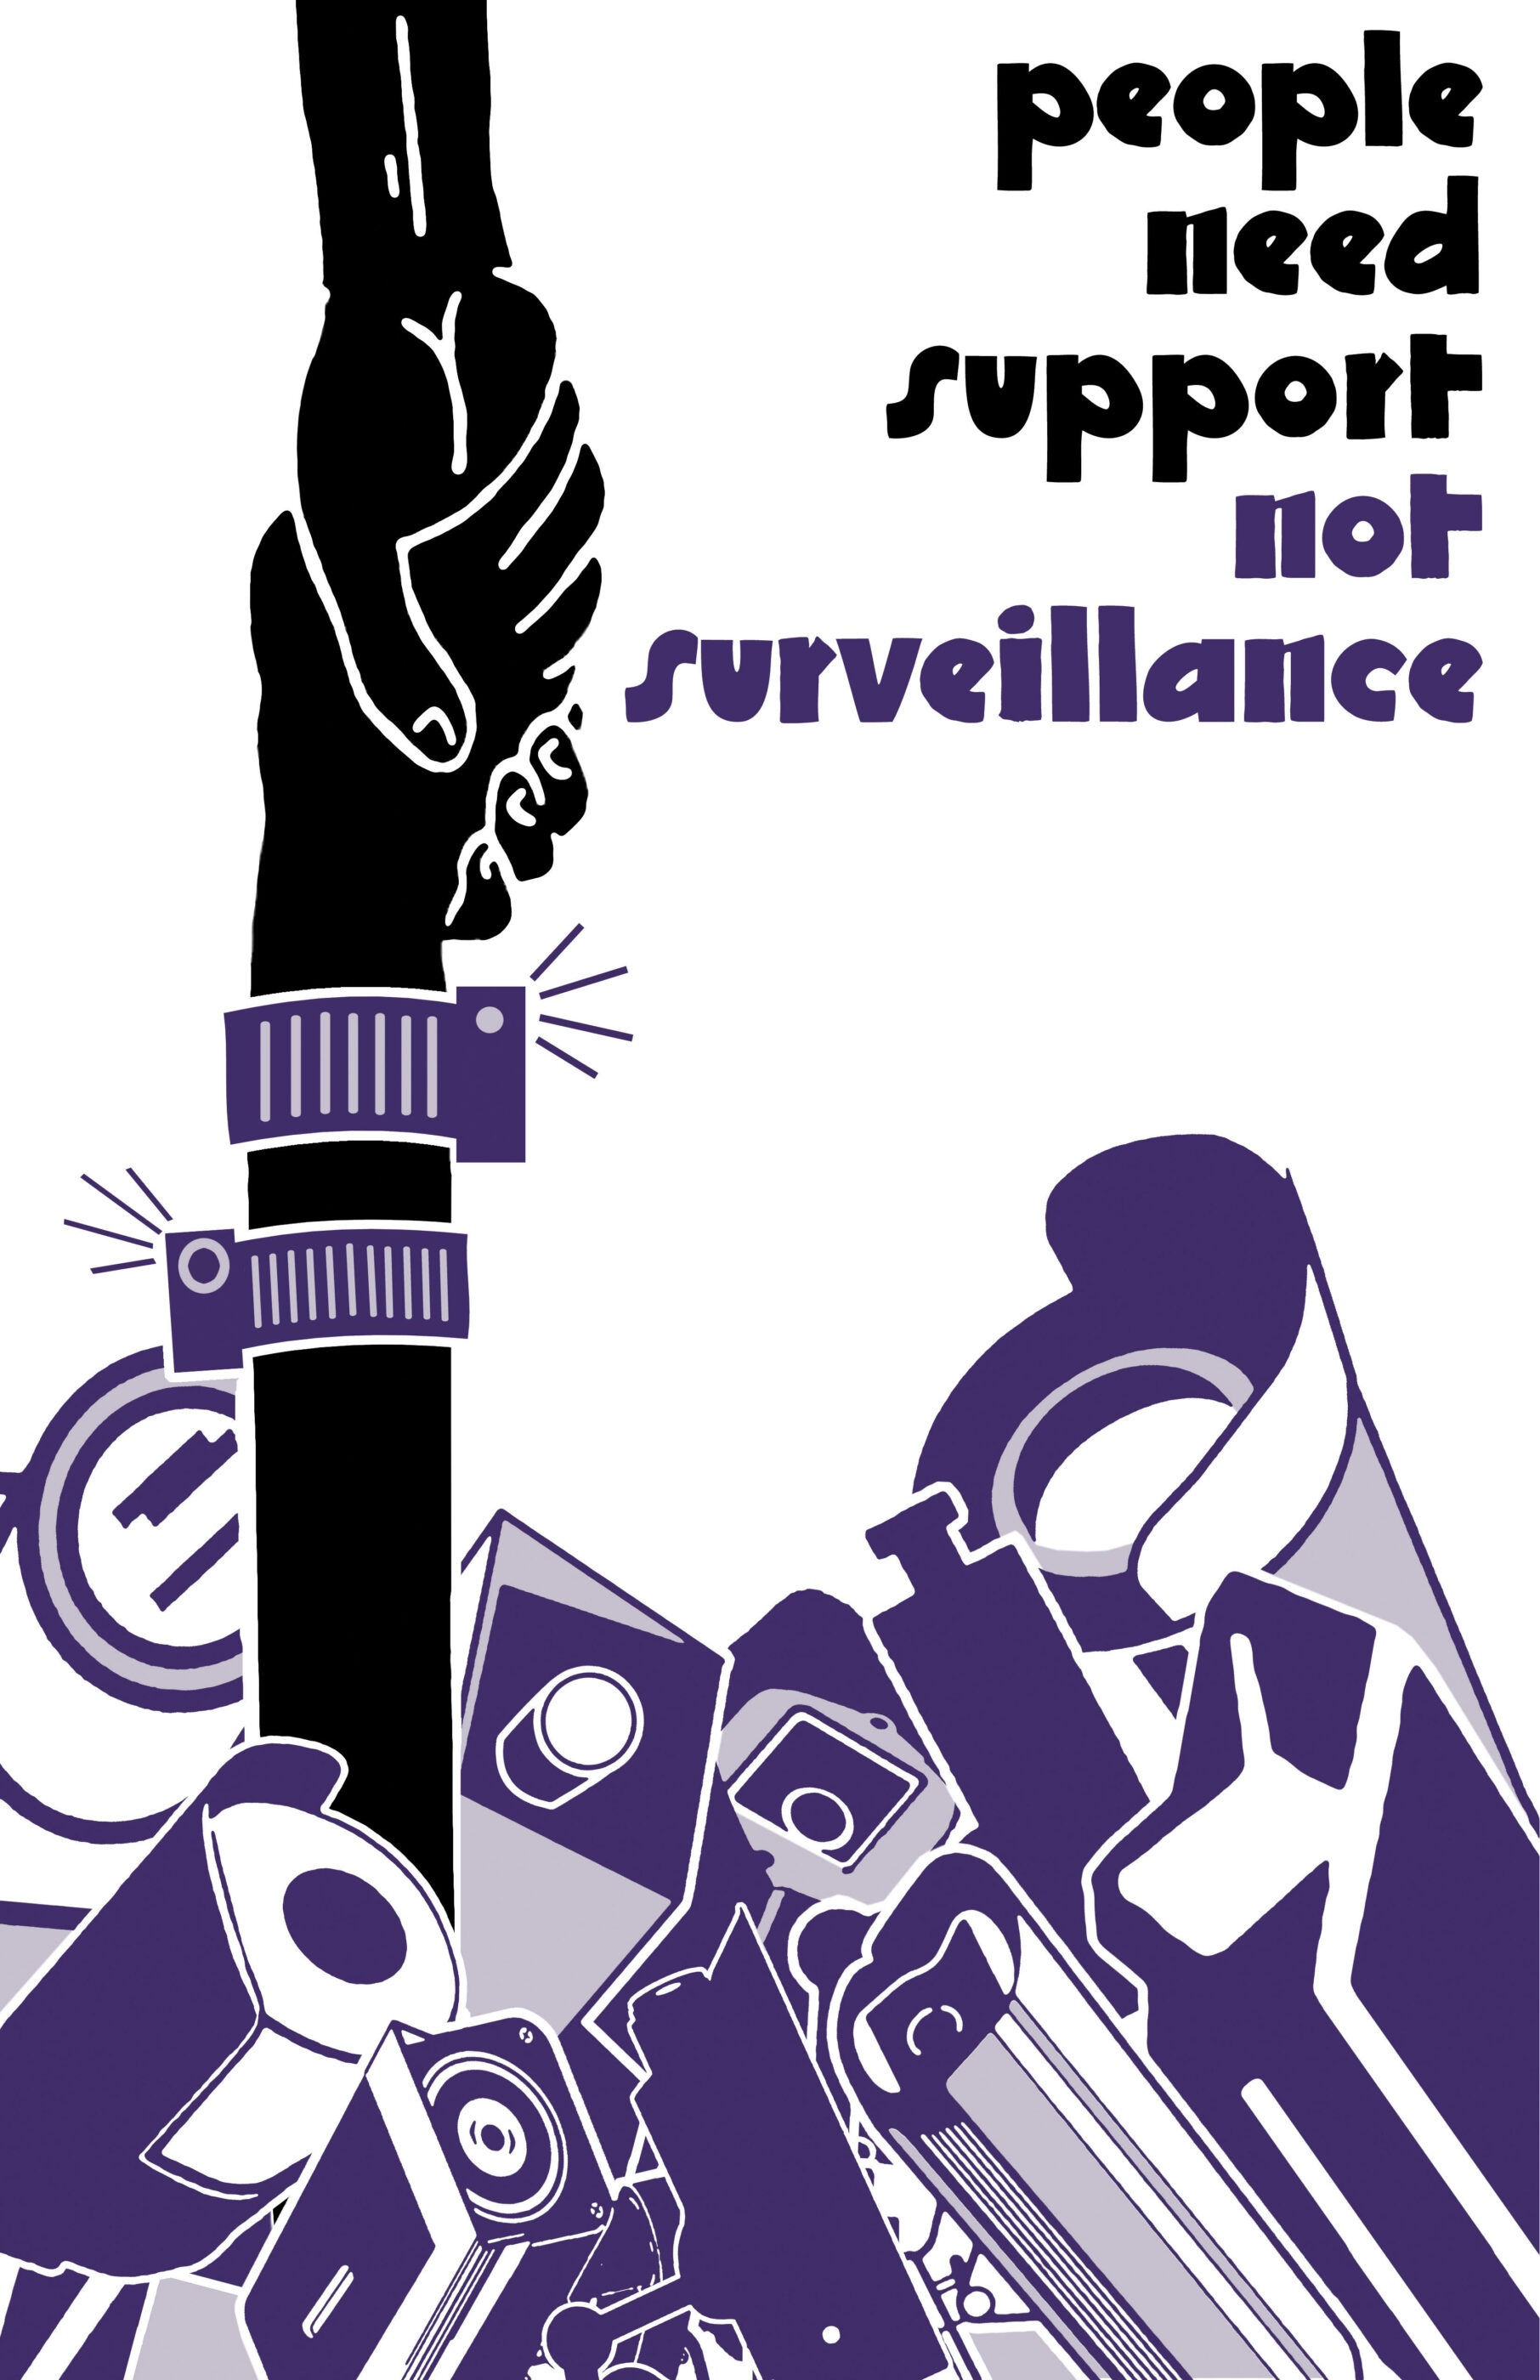 Artwork by Josh MacPhee. Image is a hand reaching down for another person’s hand who has an electronic monitor on their wrist, surrounded by cameras and other forms of electronic monitoring equipment in purple and black. Words are at the top right of the image and read “People need support, not surveillance.” 